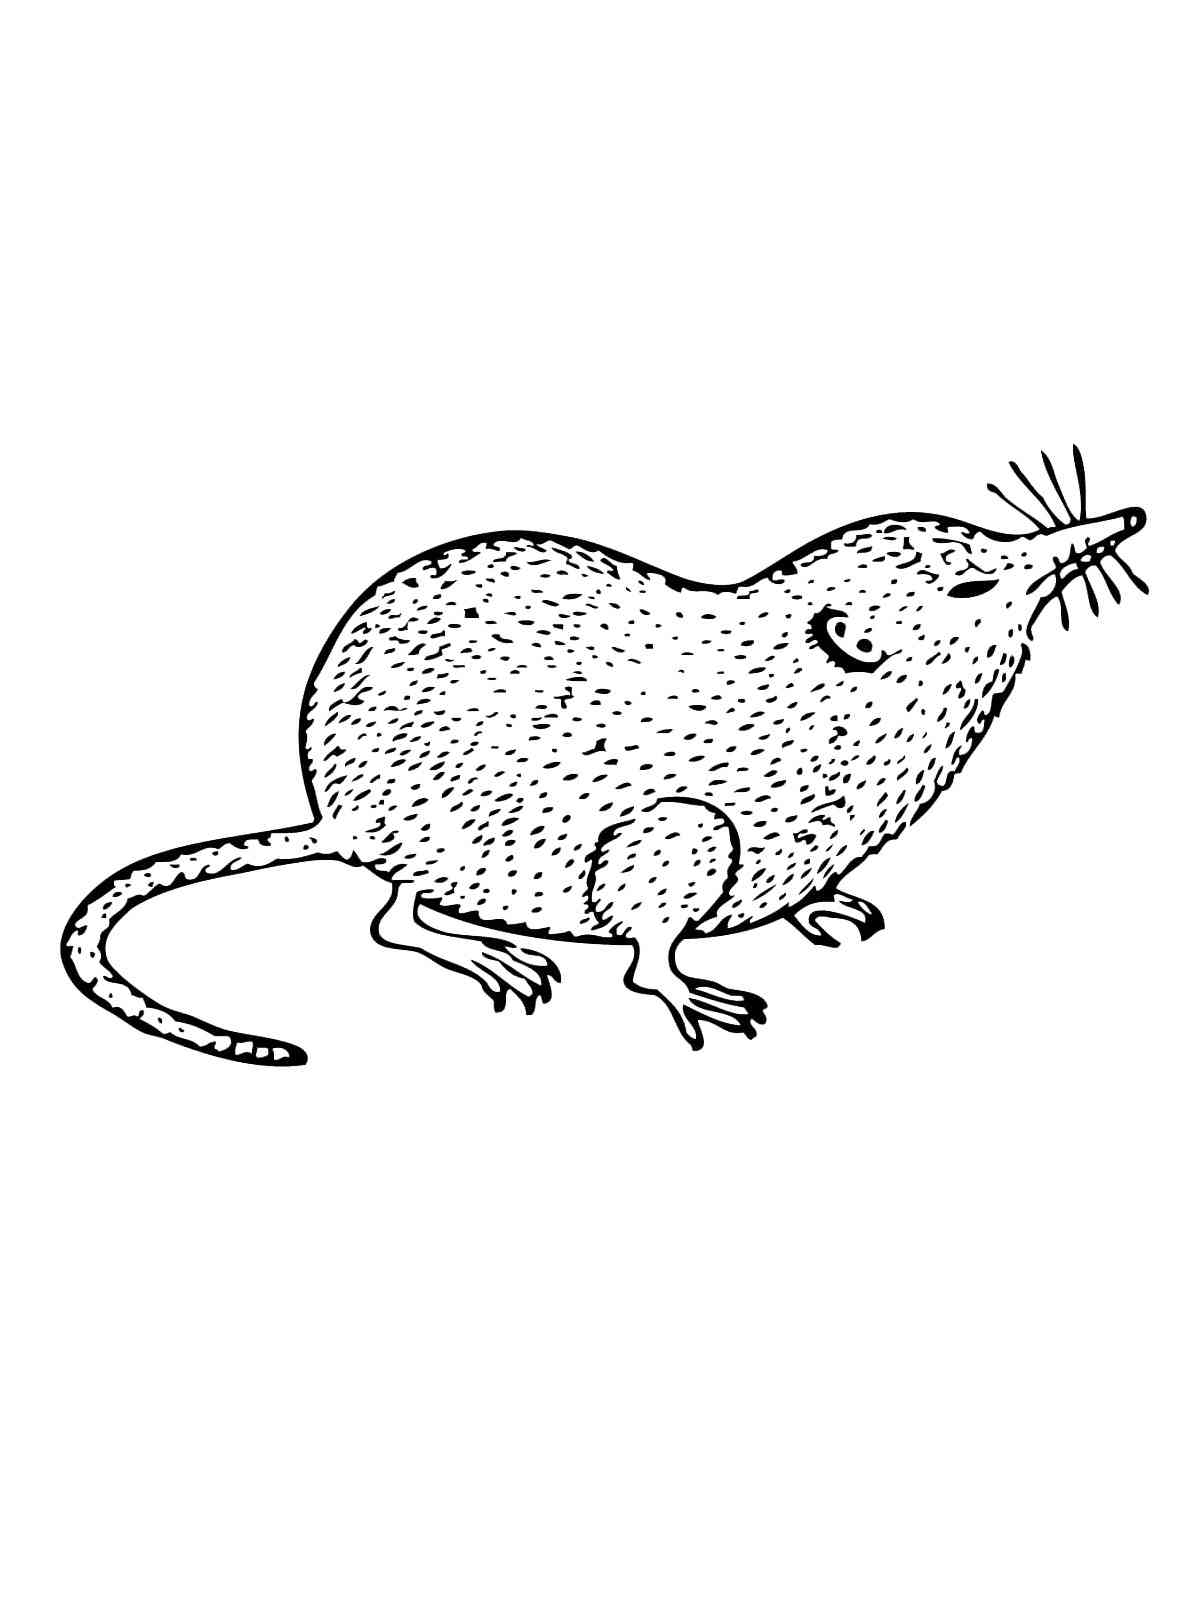 Realistic Shrew coloring page